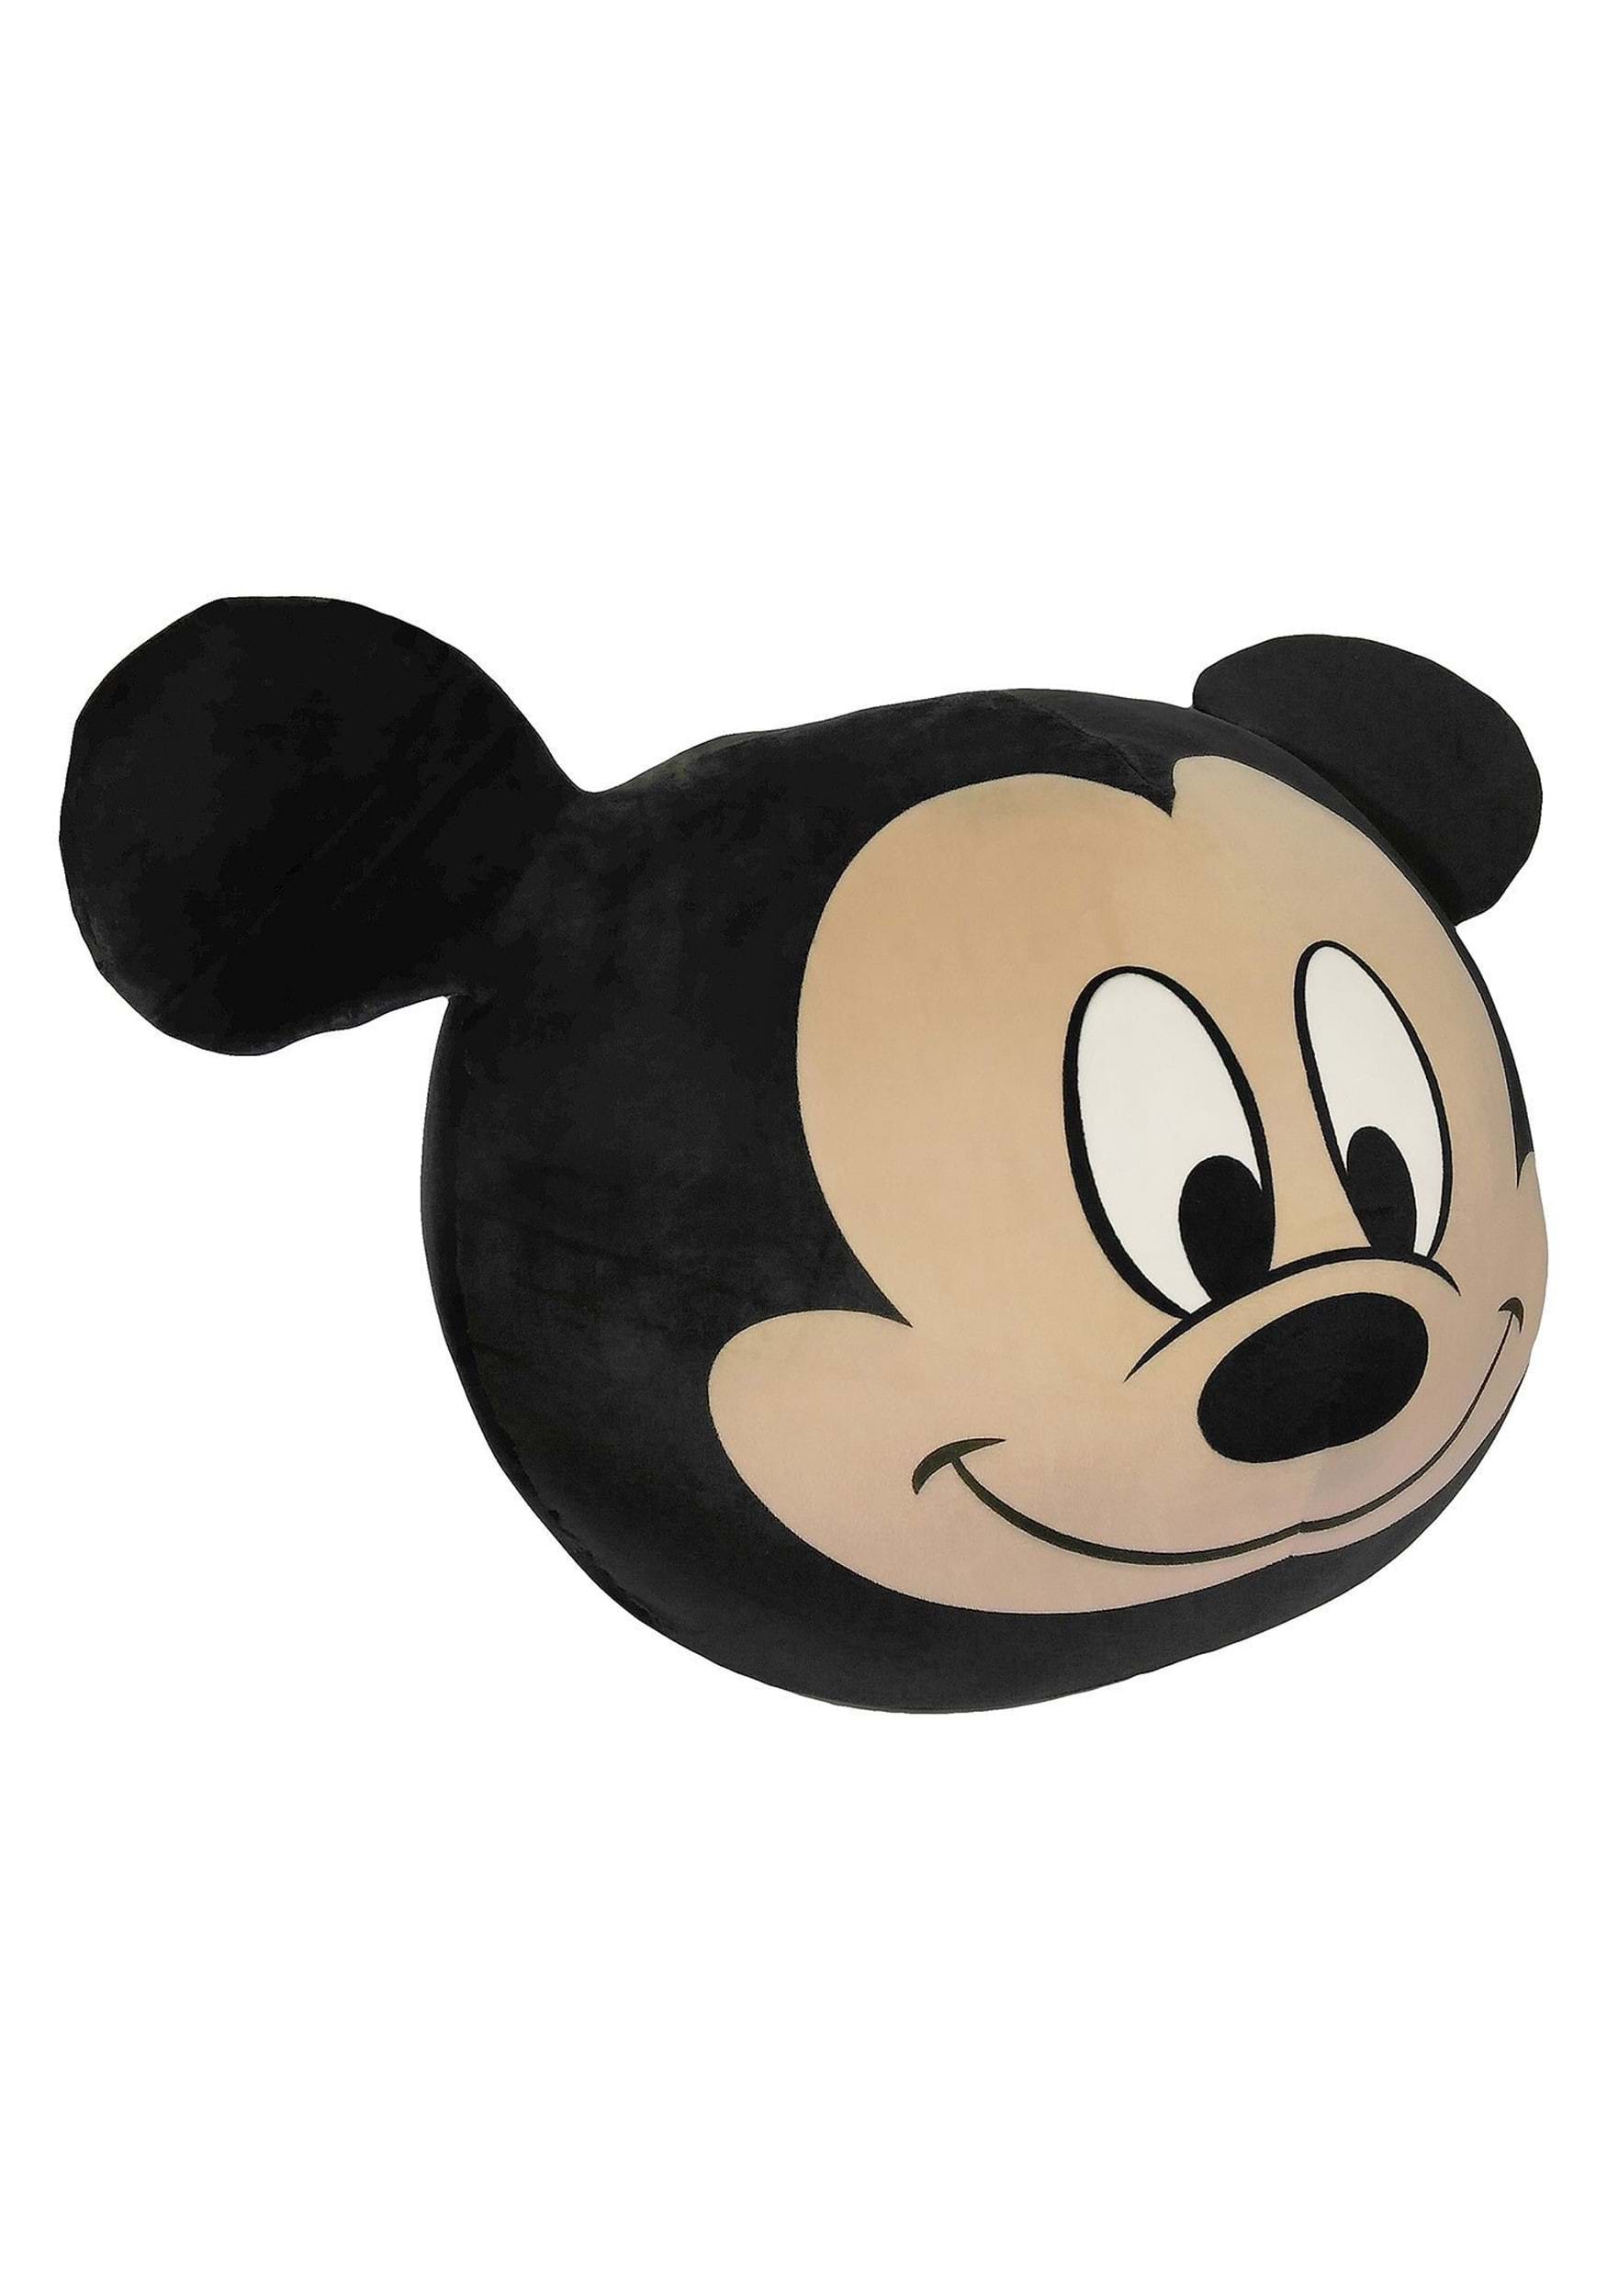 11 Inch Mickey Mouse Cloud Pillow | Mickey Mouse House Décor